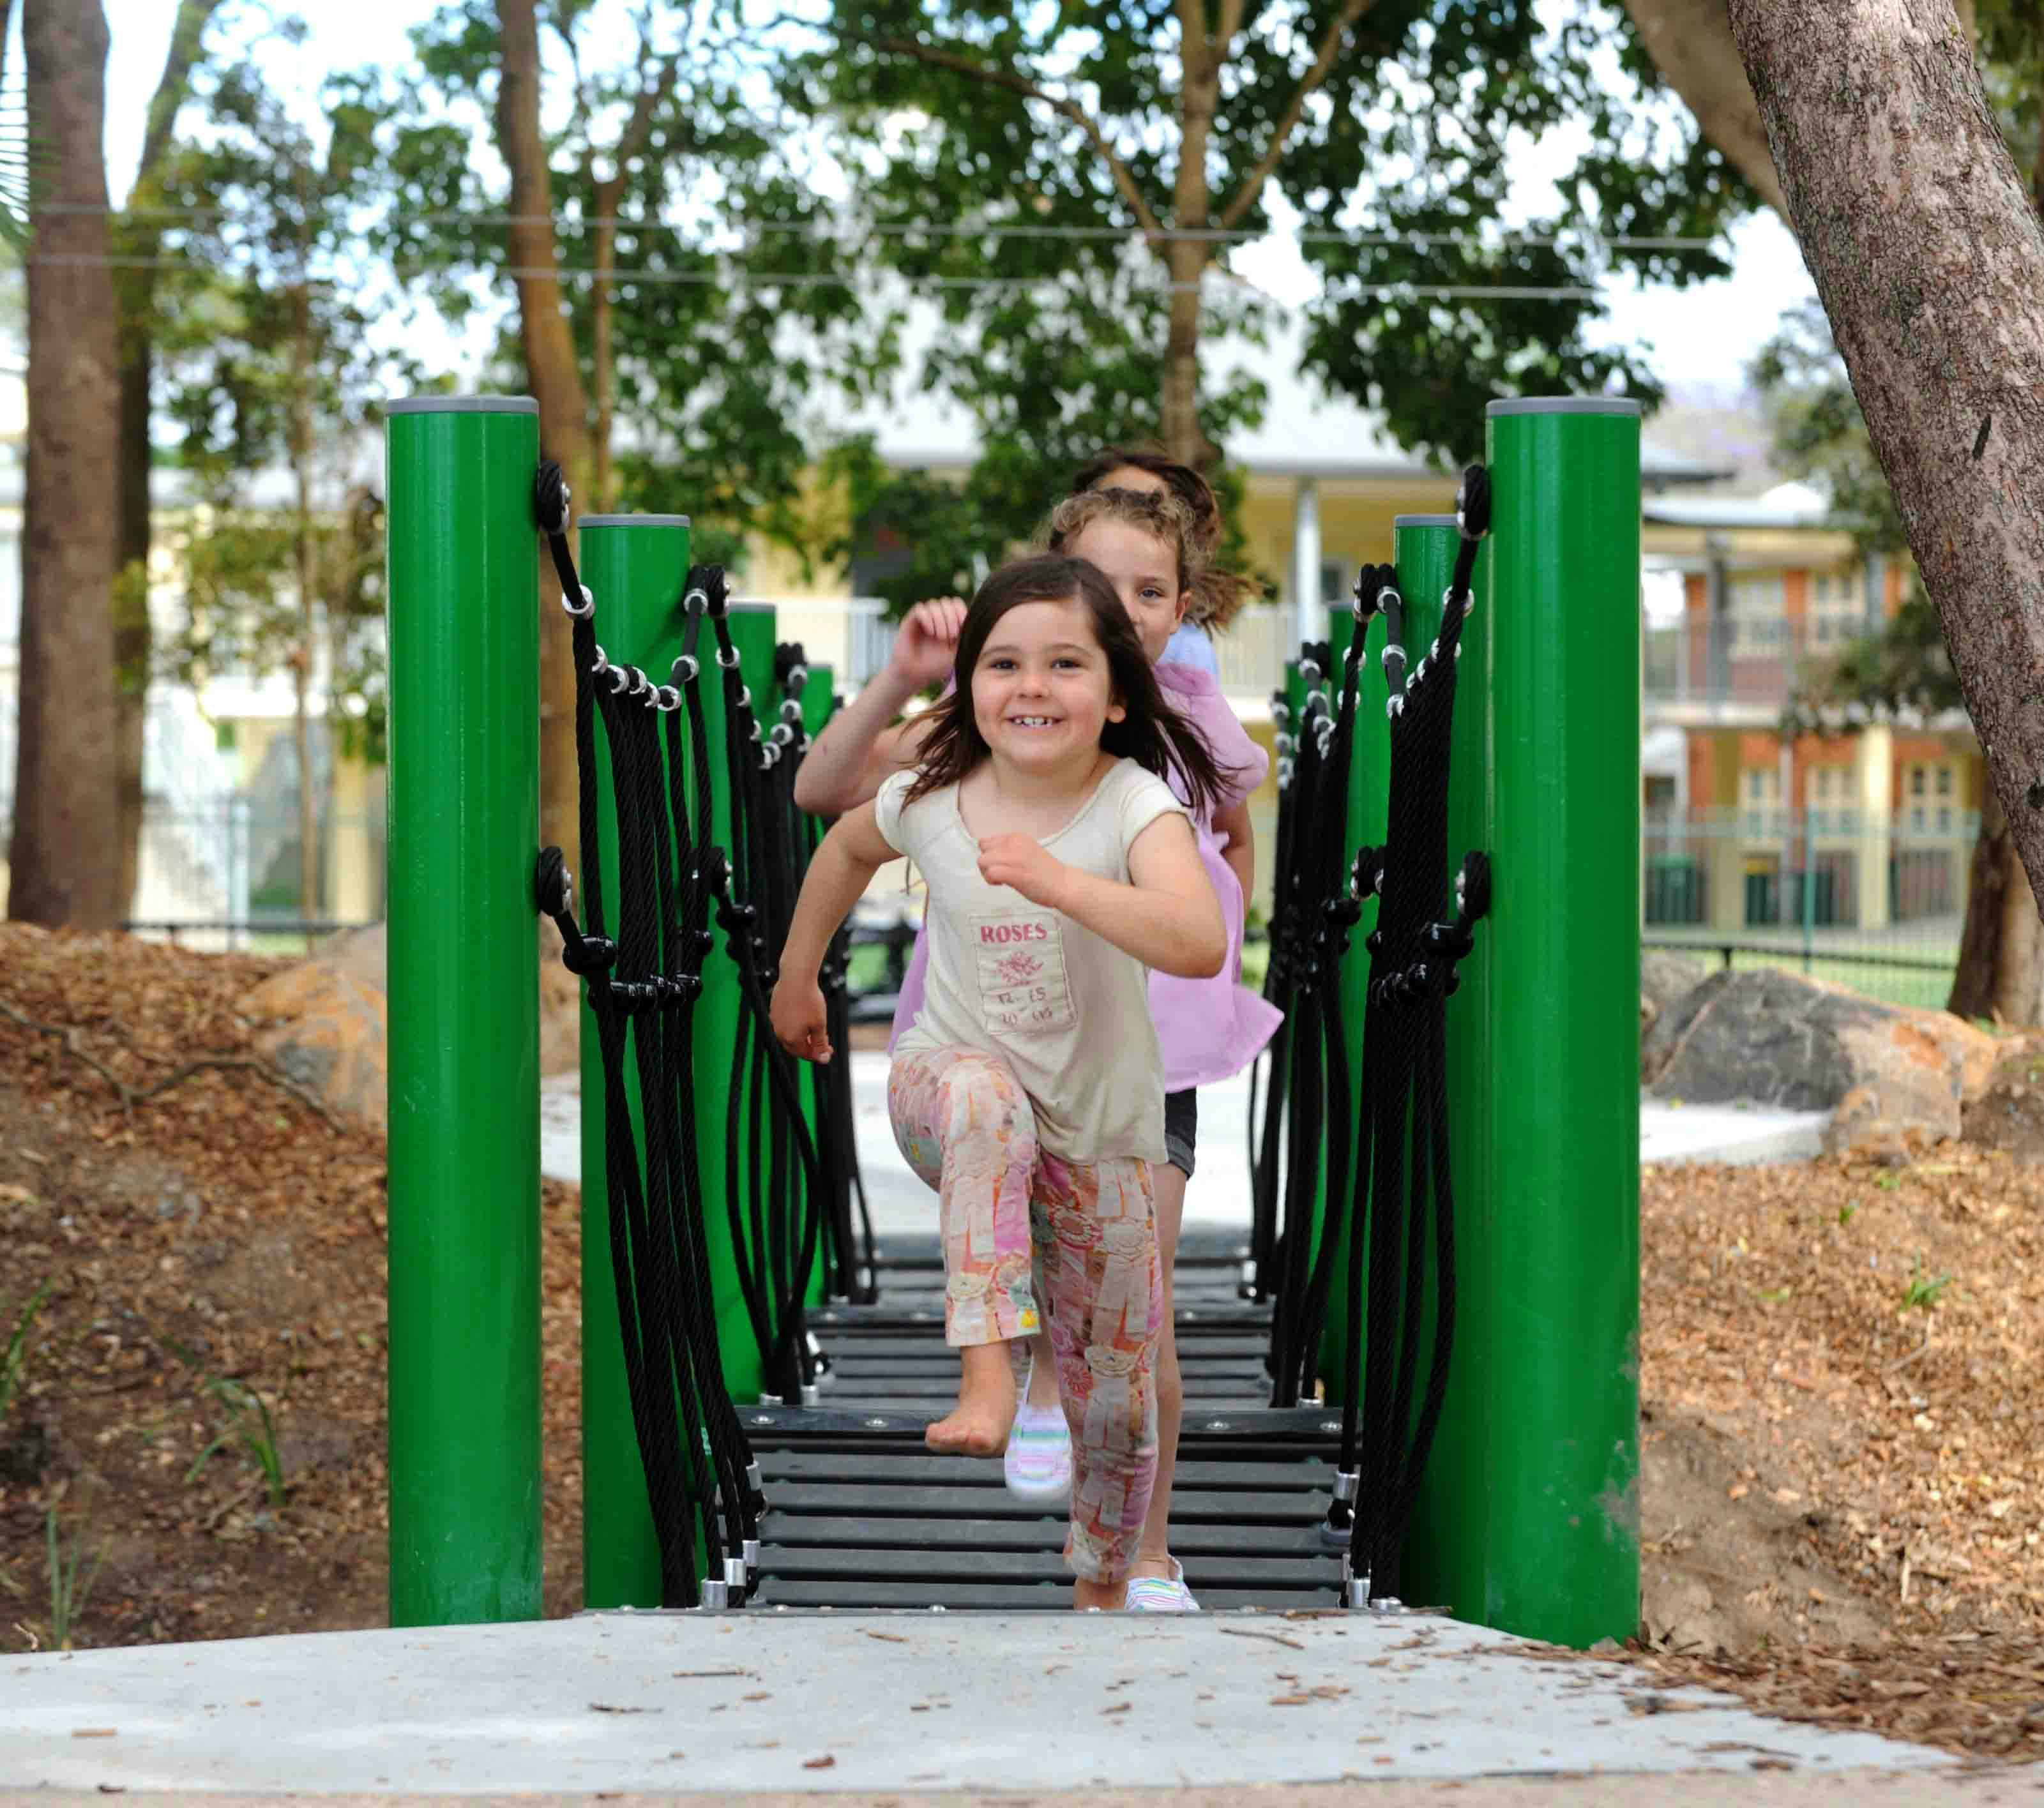 Council is reviewing its playgrounds, as part of developing the Open Space Strategy.